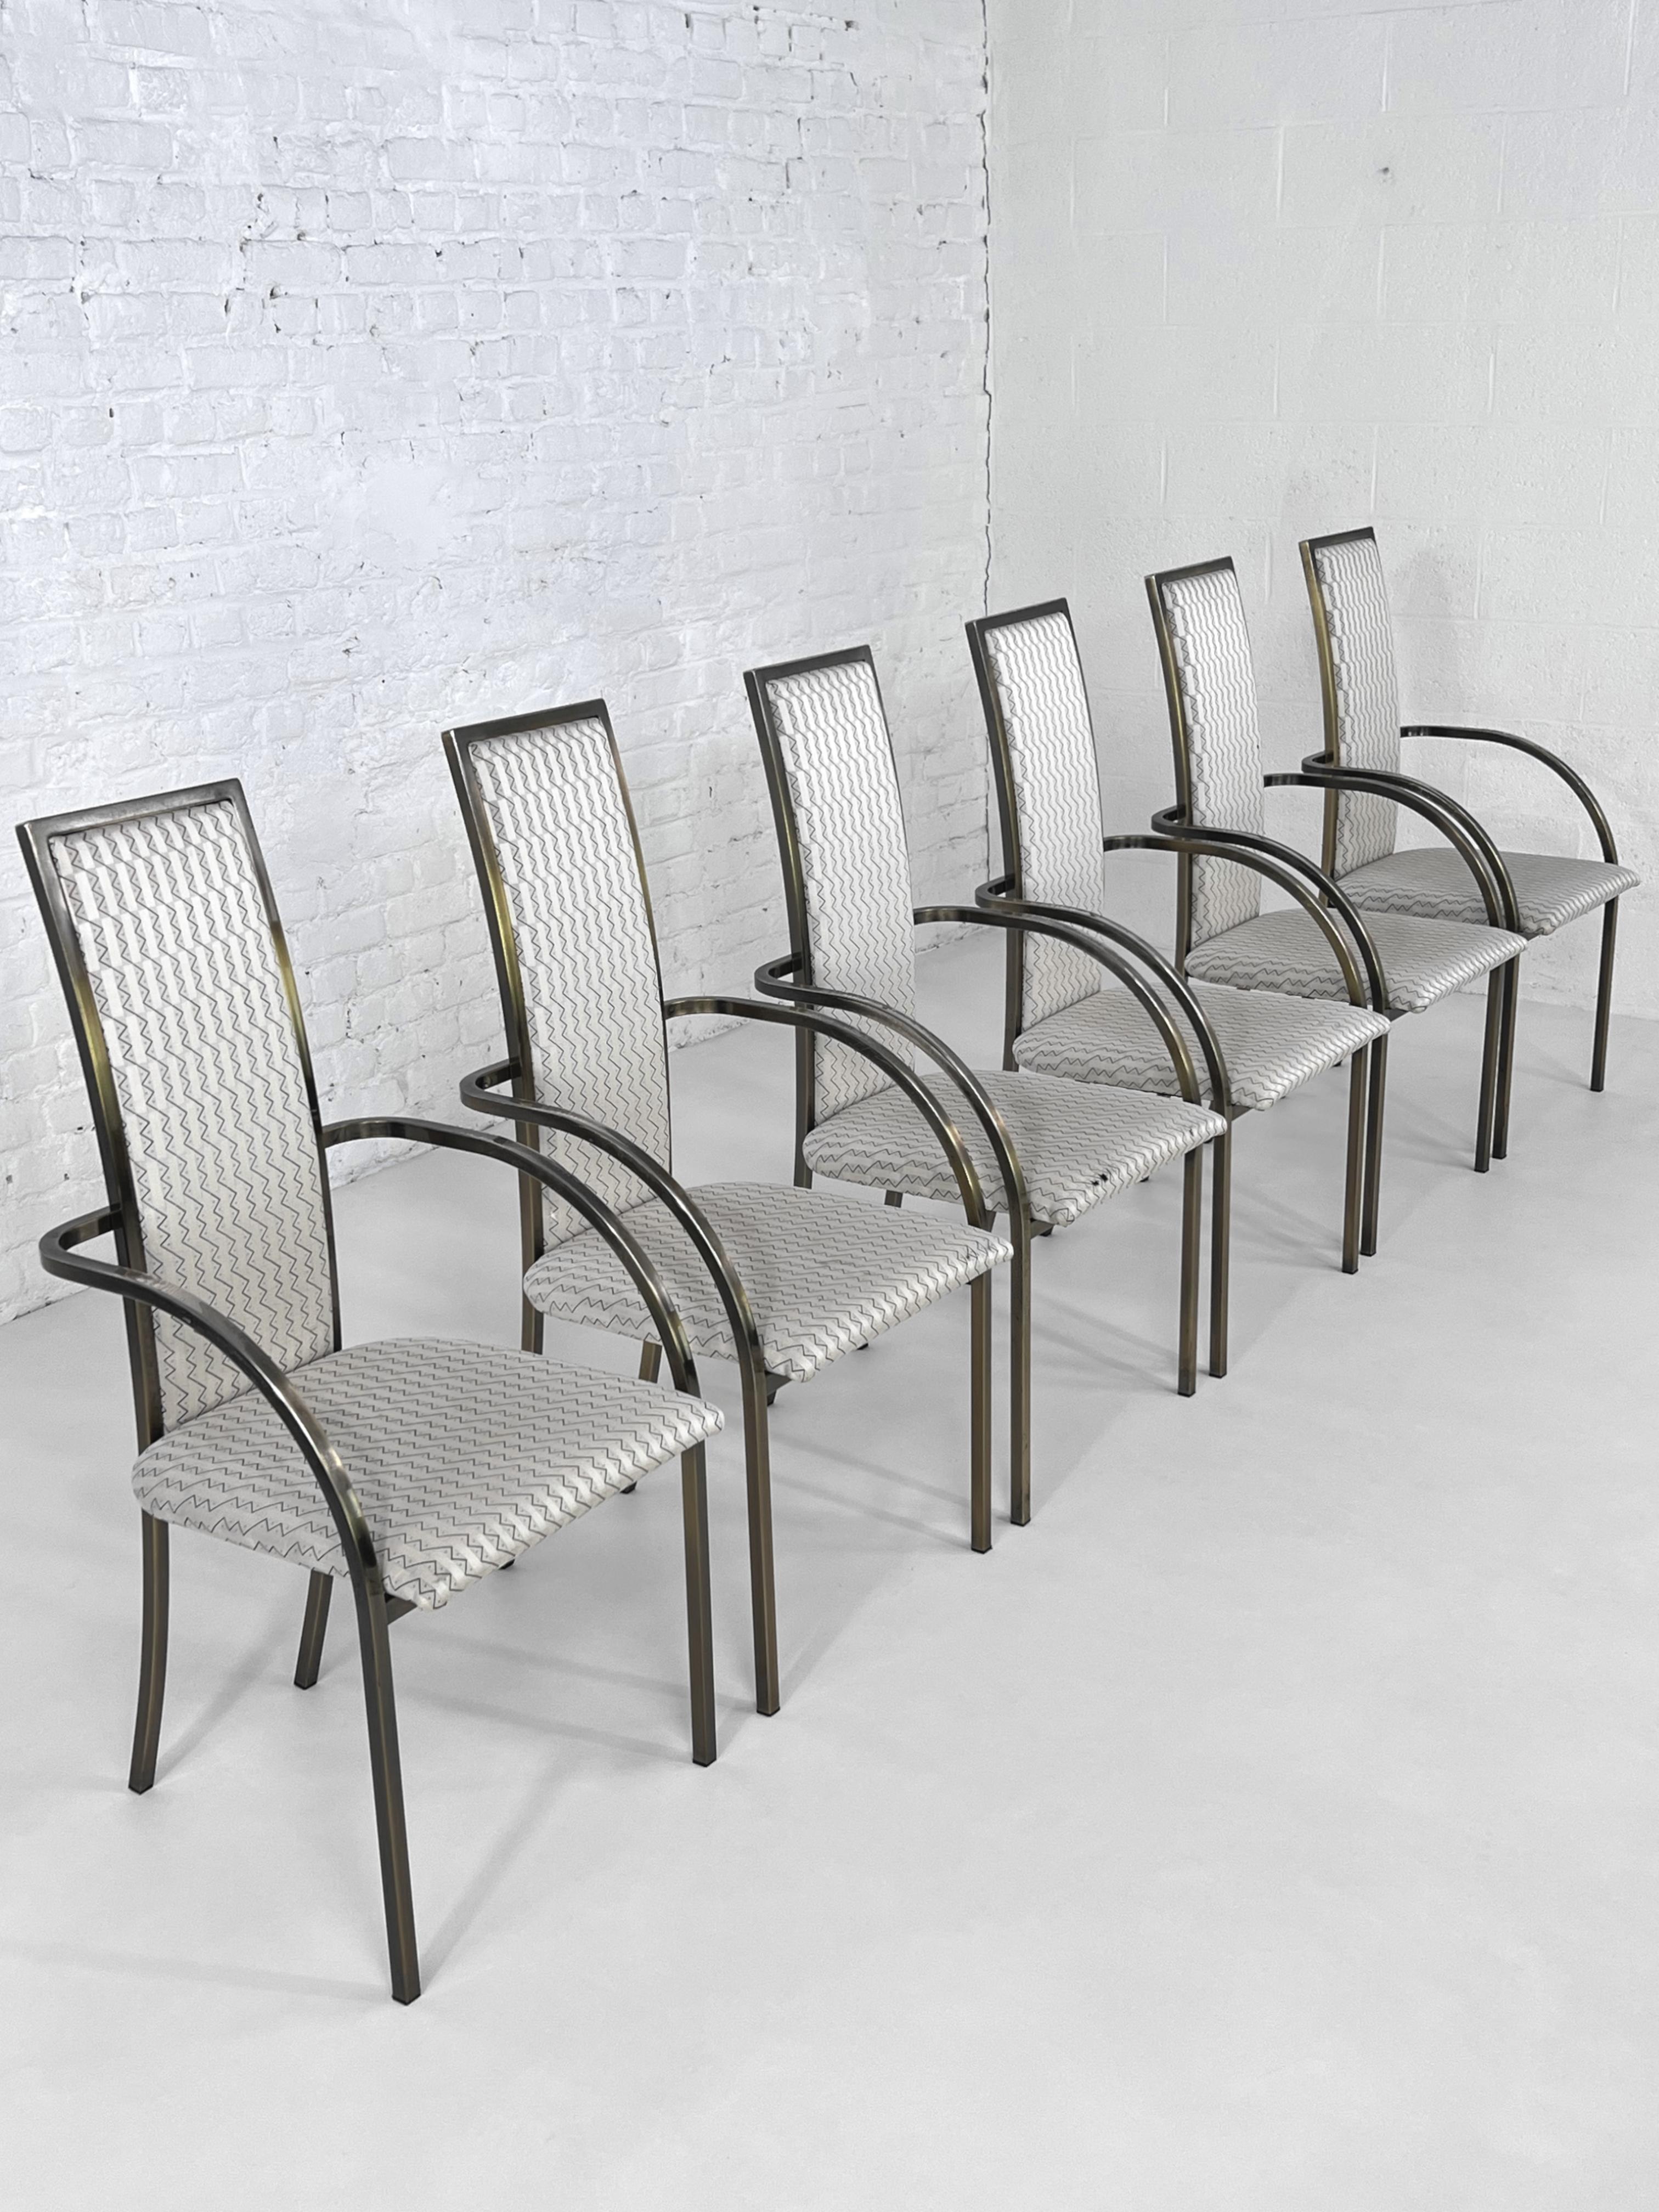 Set of six chairs design 1970s - 1980s metal and fabric by Belgo chrome
BC Design, worldwide and more commonly known as Belgo Chrome, was (the house no longer exists today) specializing in the design and production of high-quality furniture, side